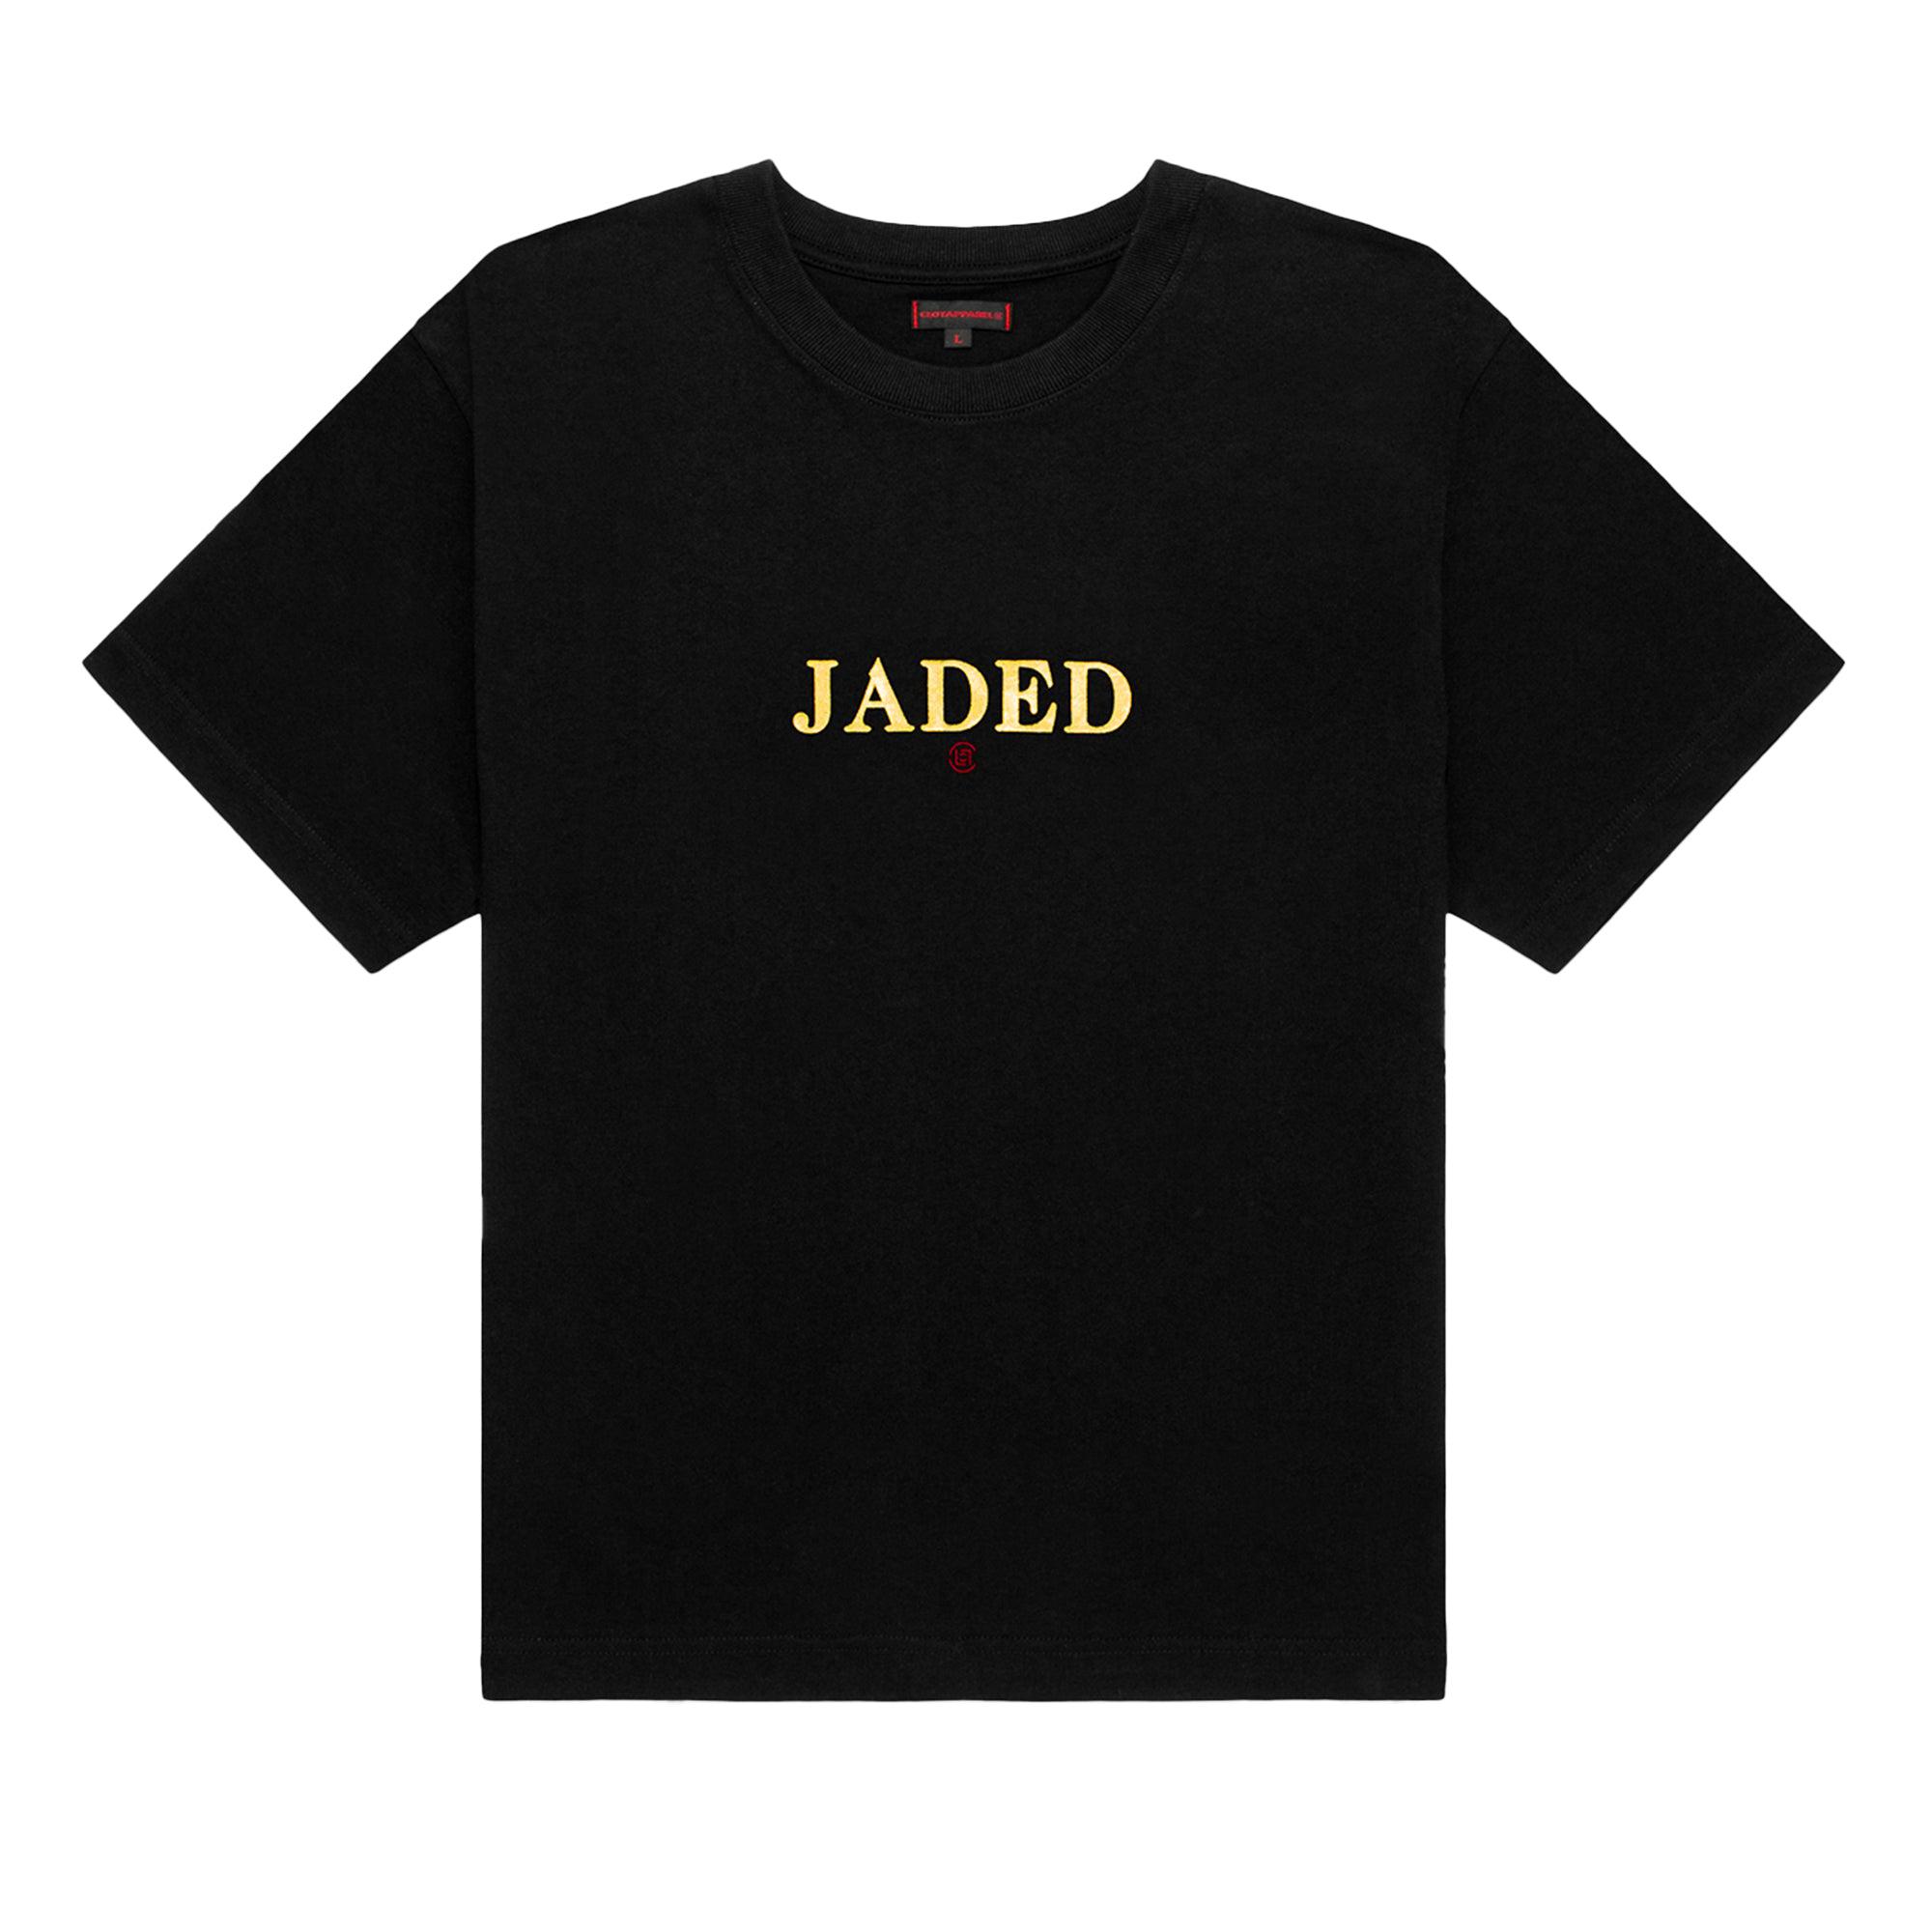 CLOT Jaded Lenticular Patch Tee (Black) by CLOT